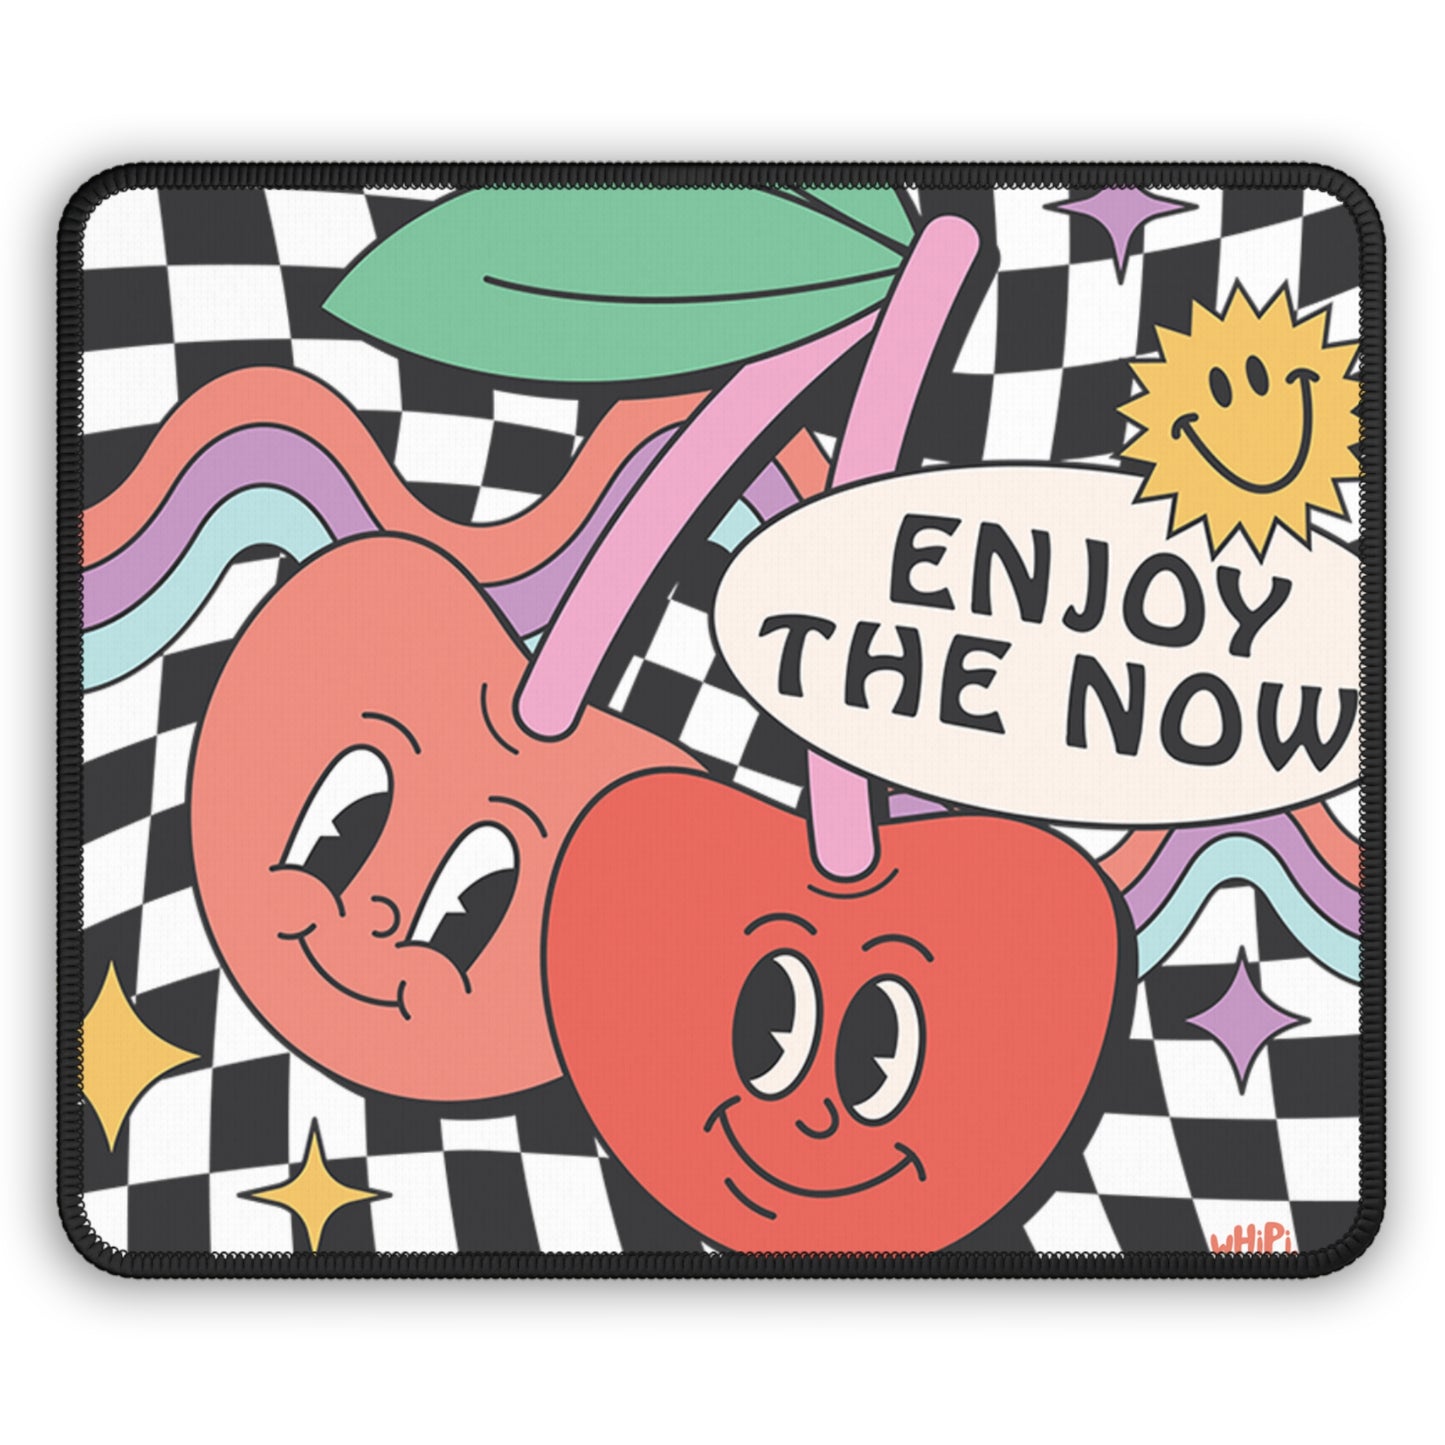 Enjoy the Now Mouse Pad